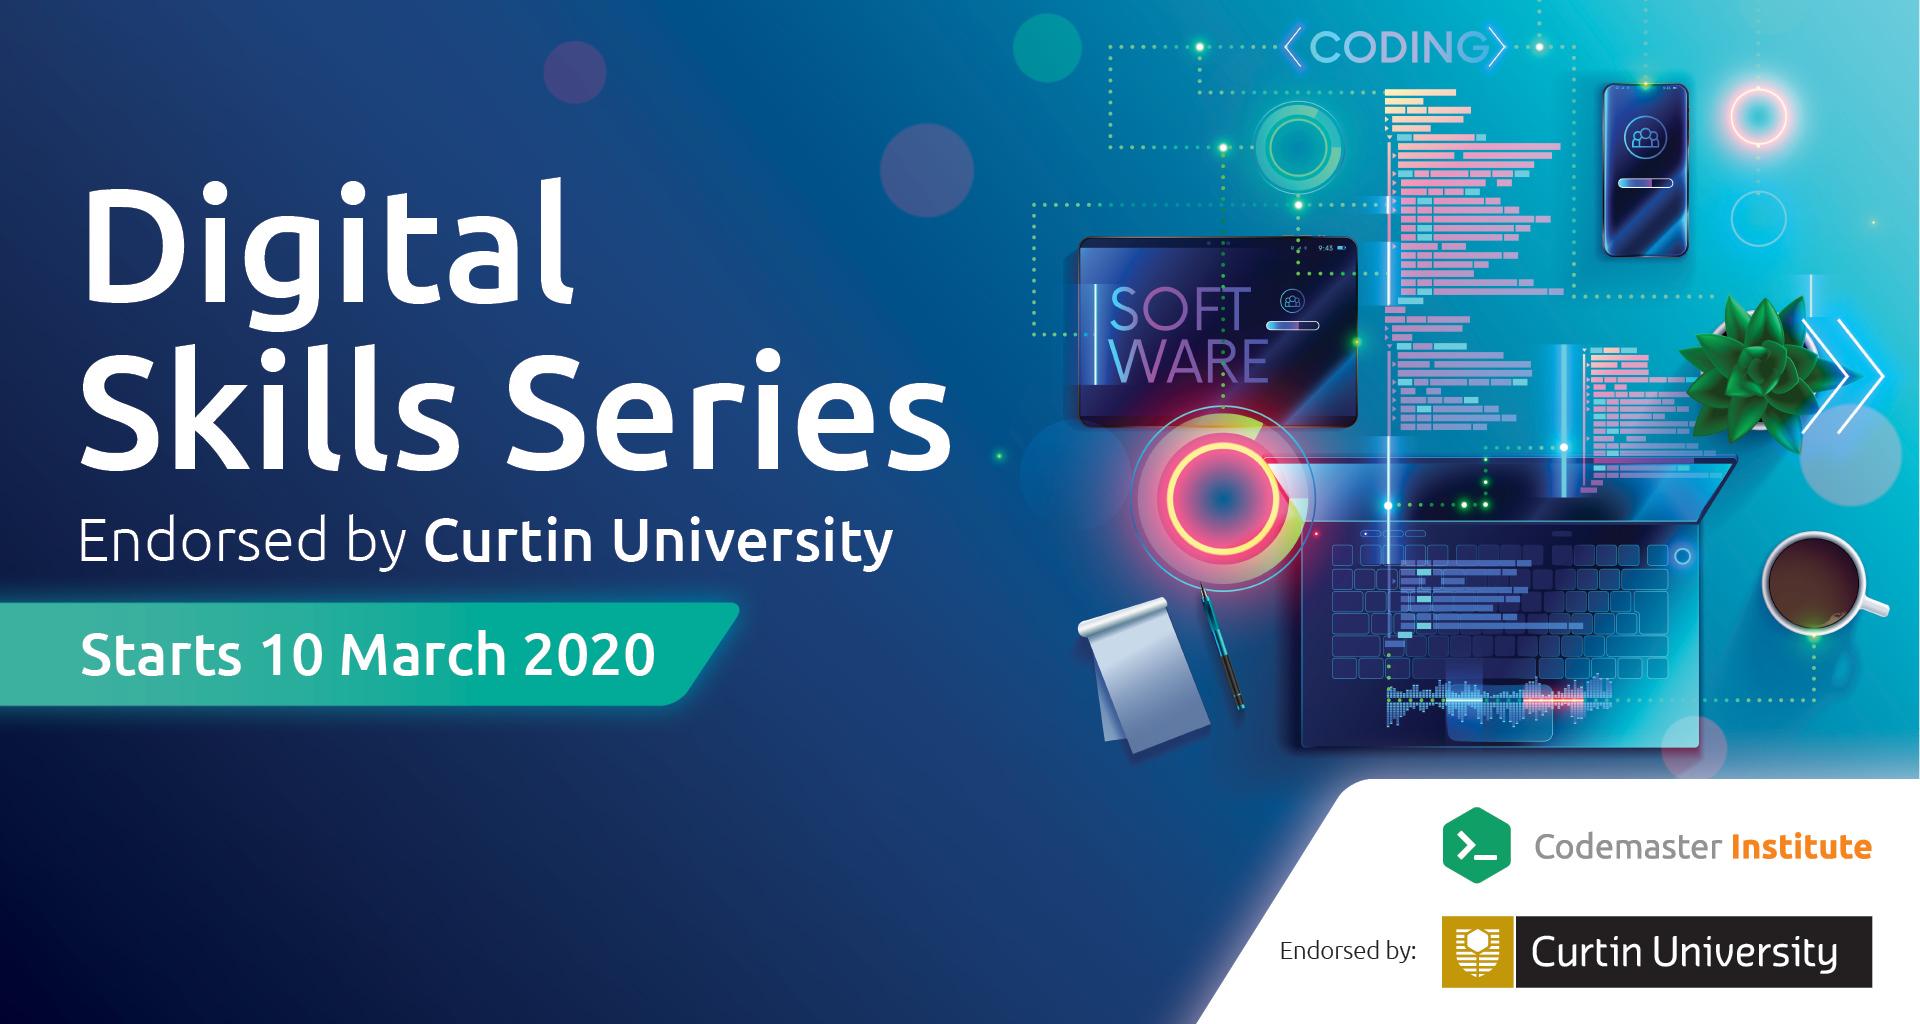 Digital Skills Series - endorsed by Curtin University Information Session